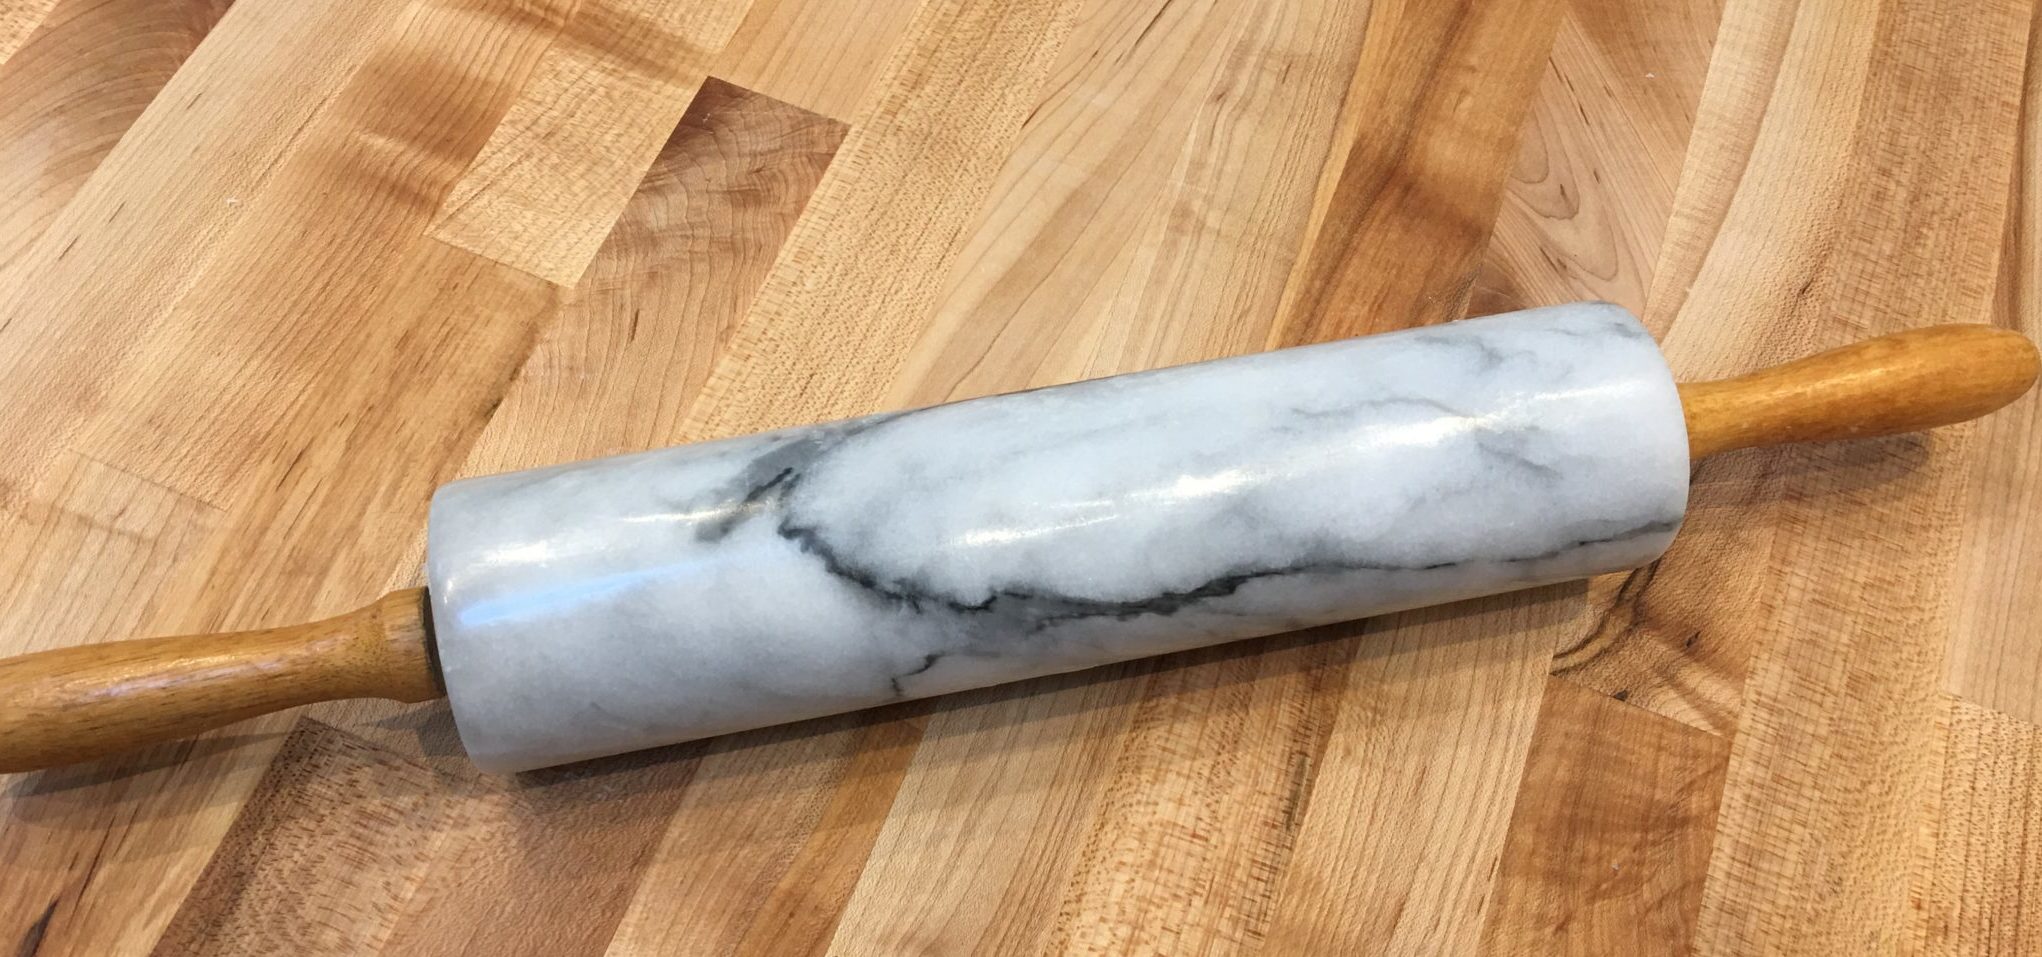 Rolling pin made of marble